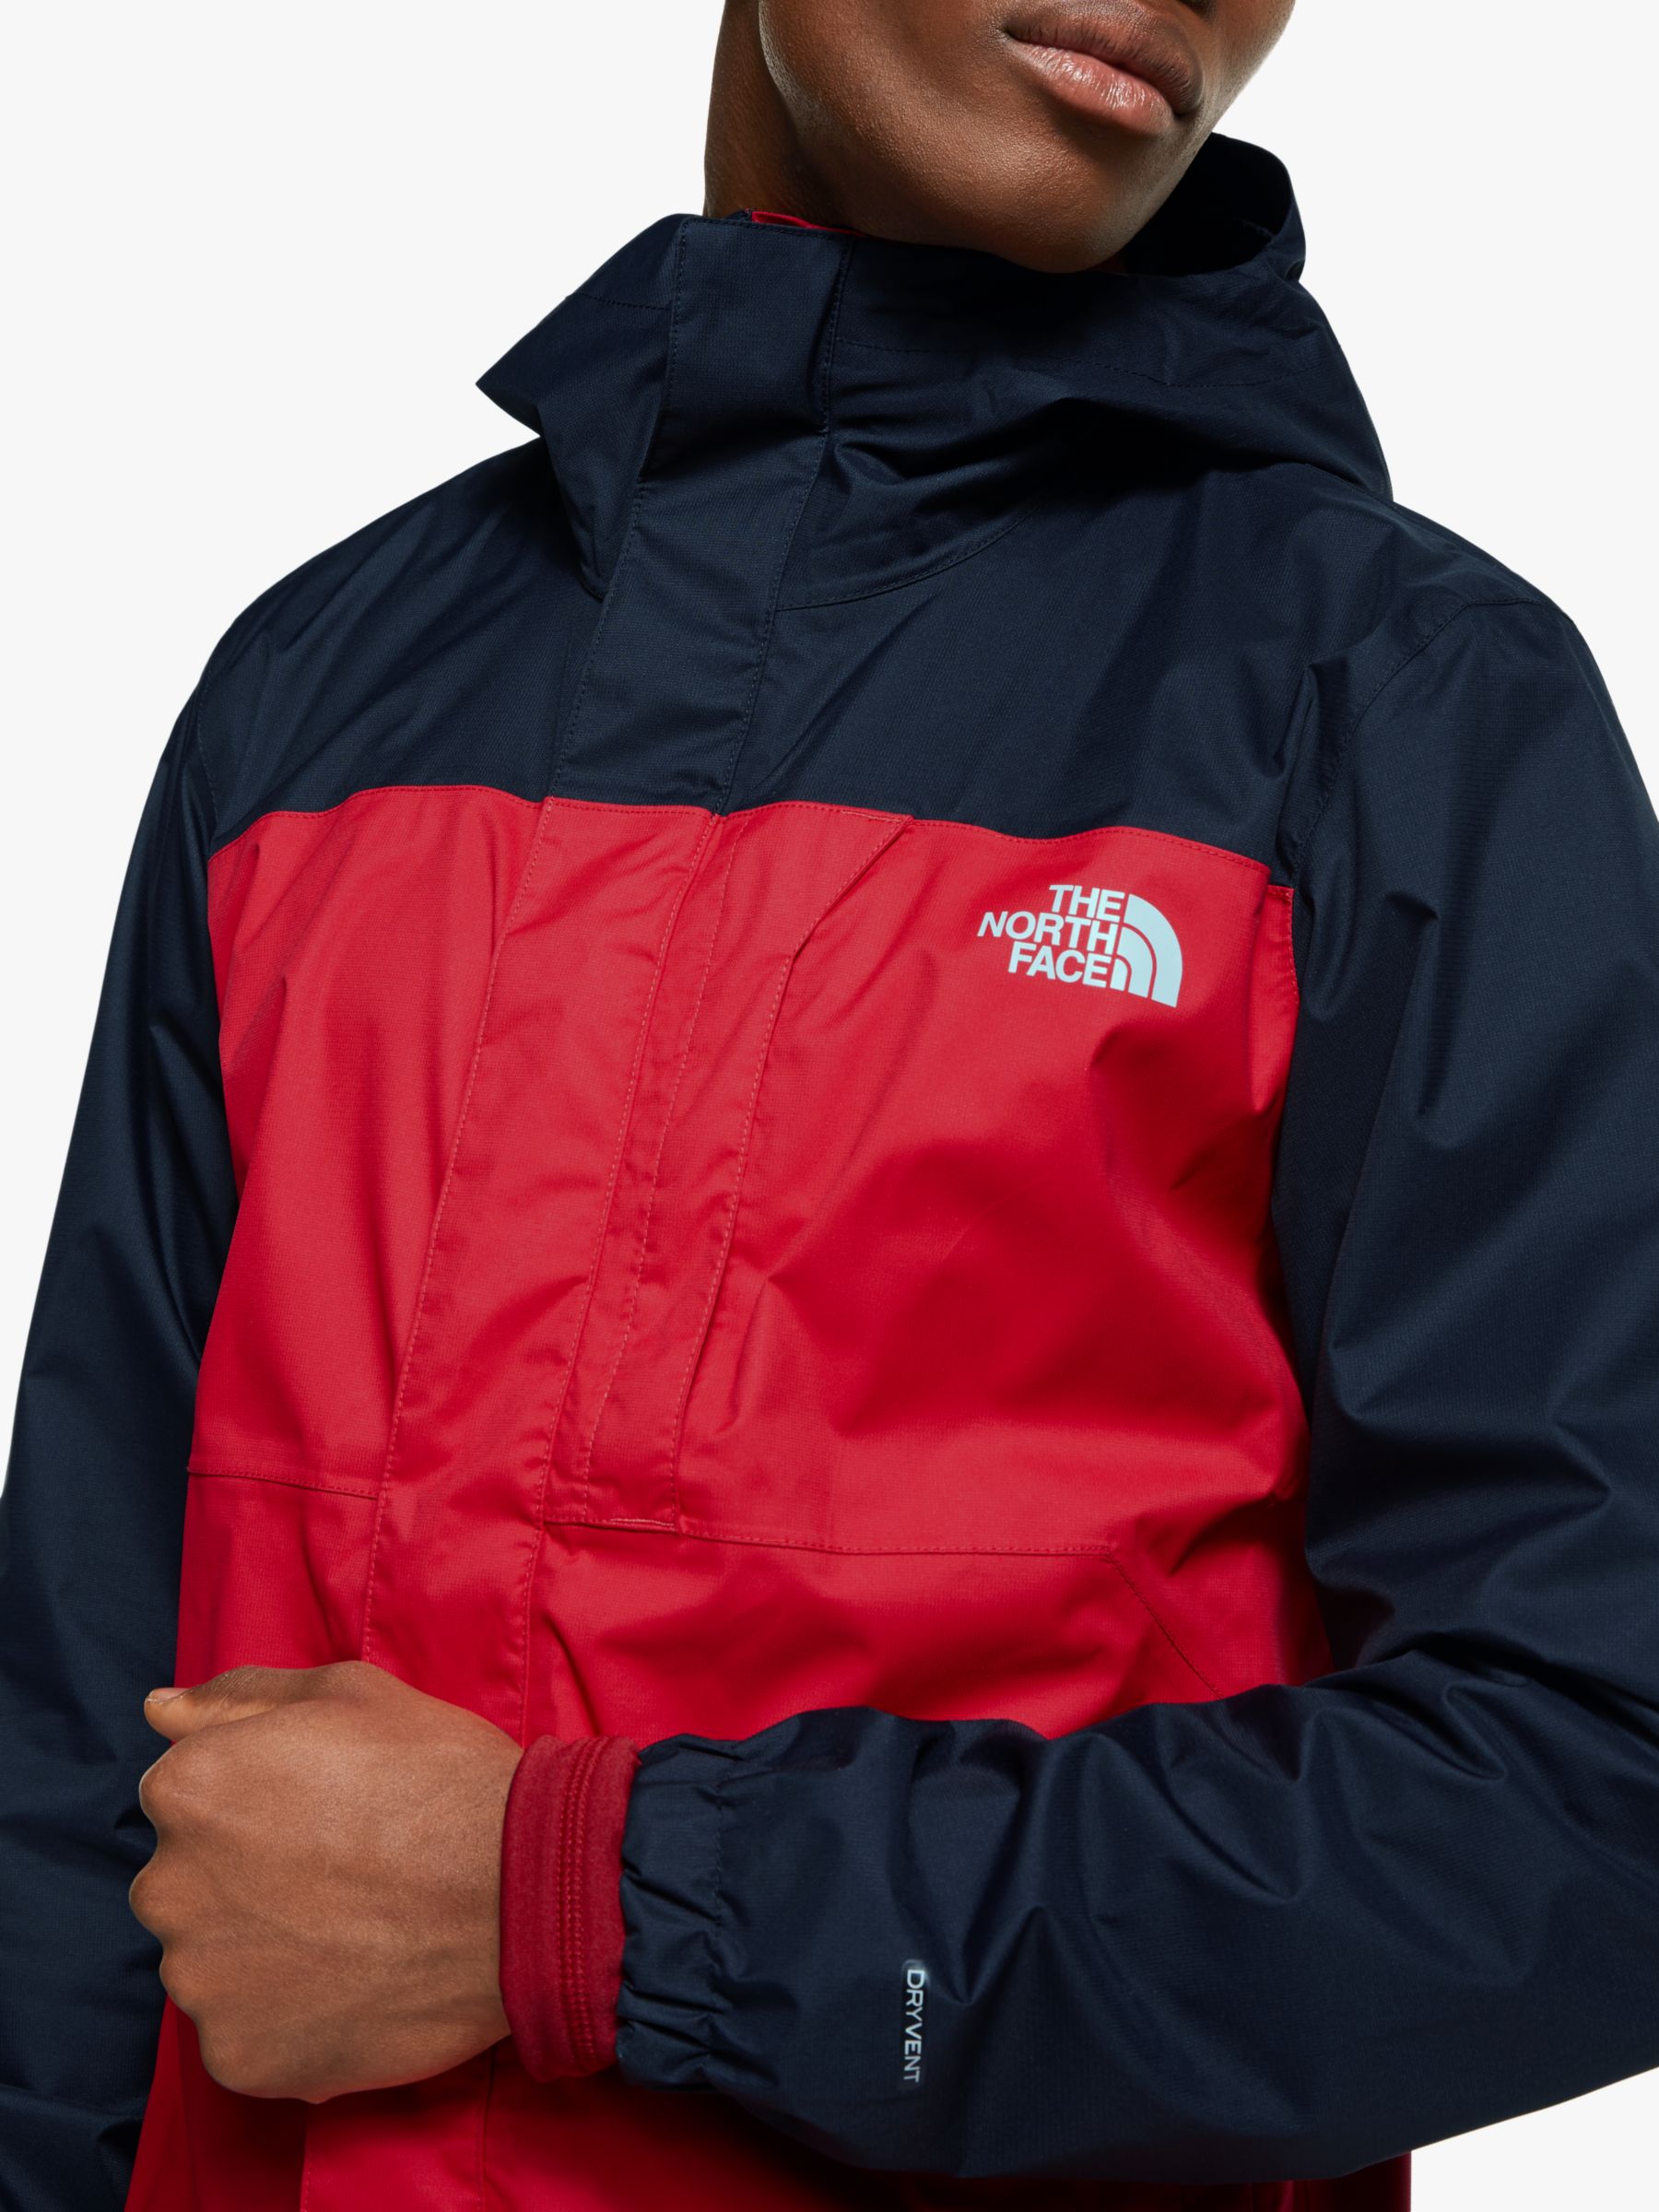 north face dryvent jacket men red 